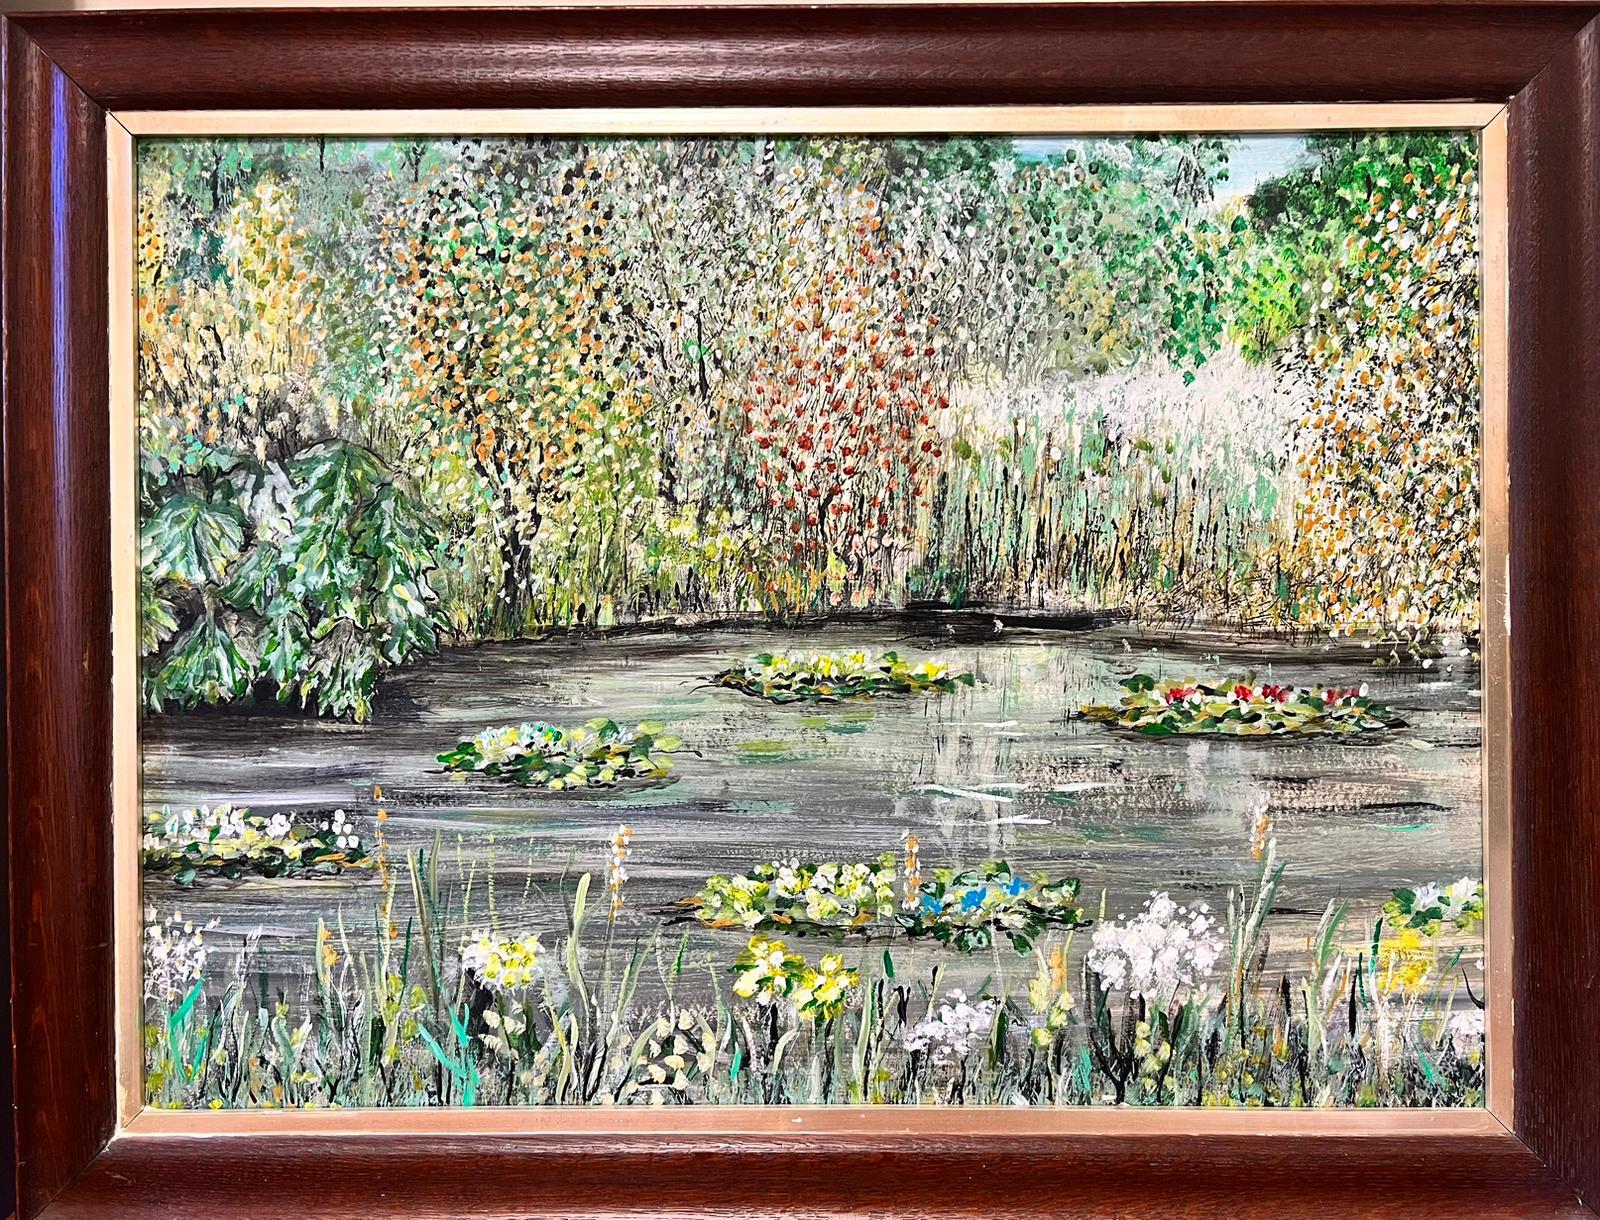 Contemporary British artist, 21st century
oil on board, framed
framed: 25 x 33 inches
board: 22 x 29 inches
This came from a private collection of artworks by the artist, a few of which are signed 'Andrew Bailey' -  Surrey, England 
The painting is